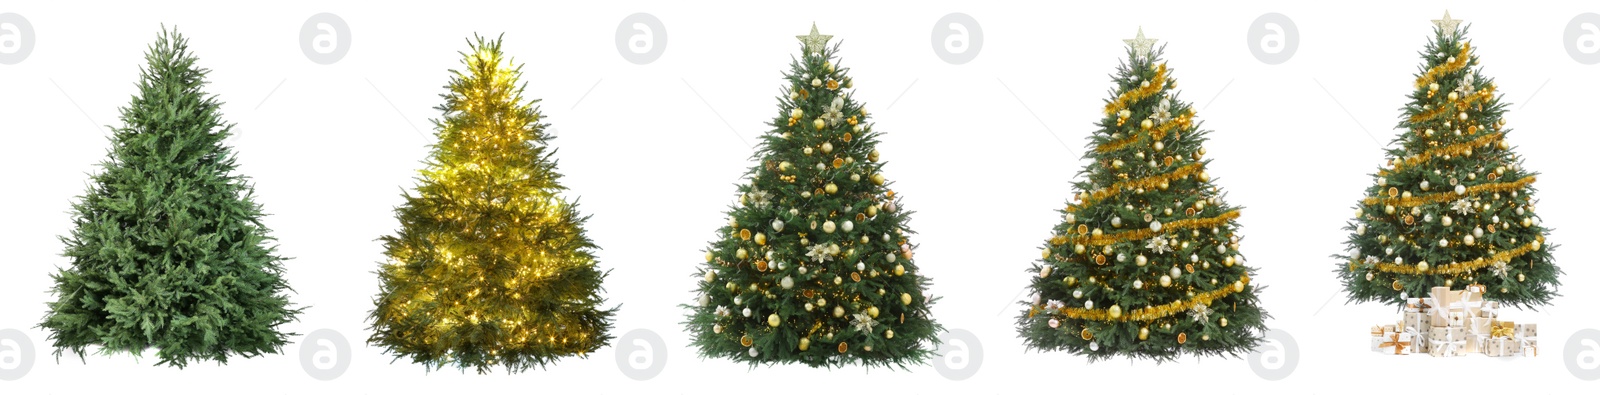 Image of Christmas tree isolated on white, step-by-step decorating